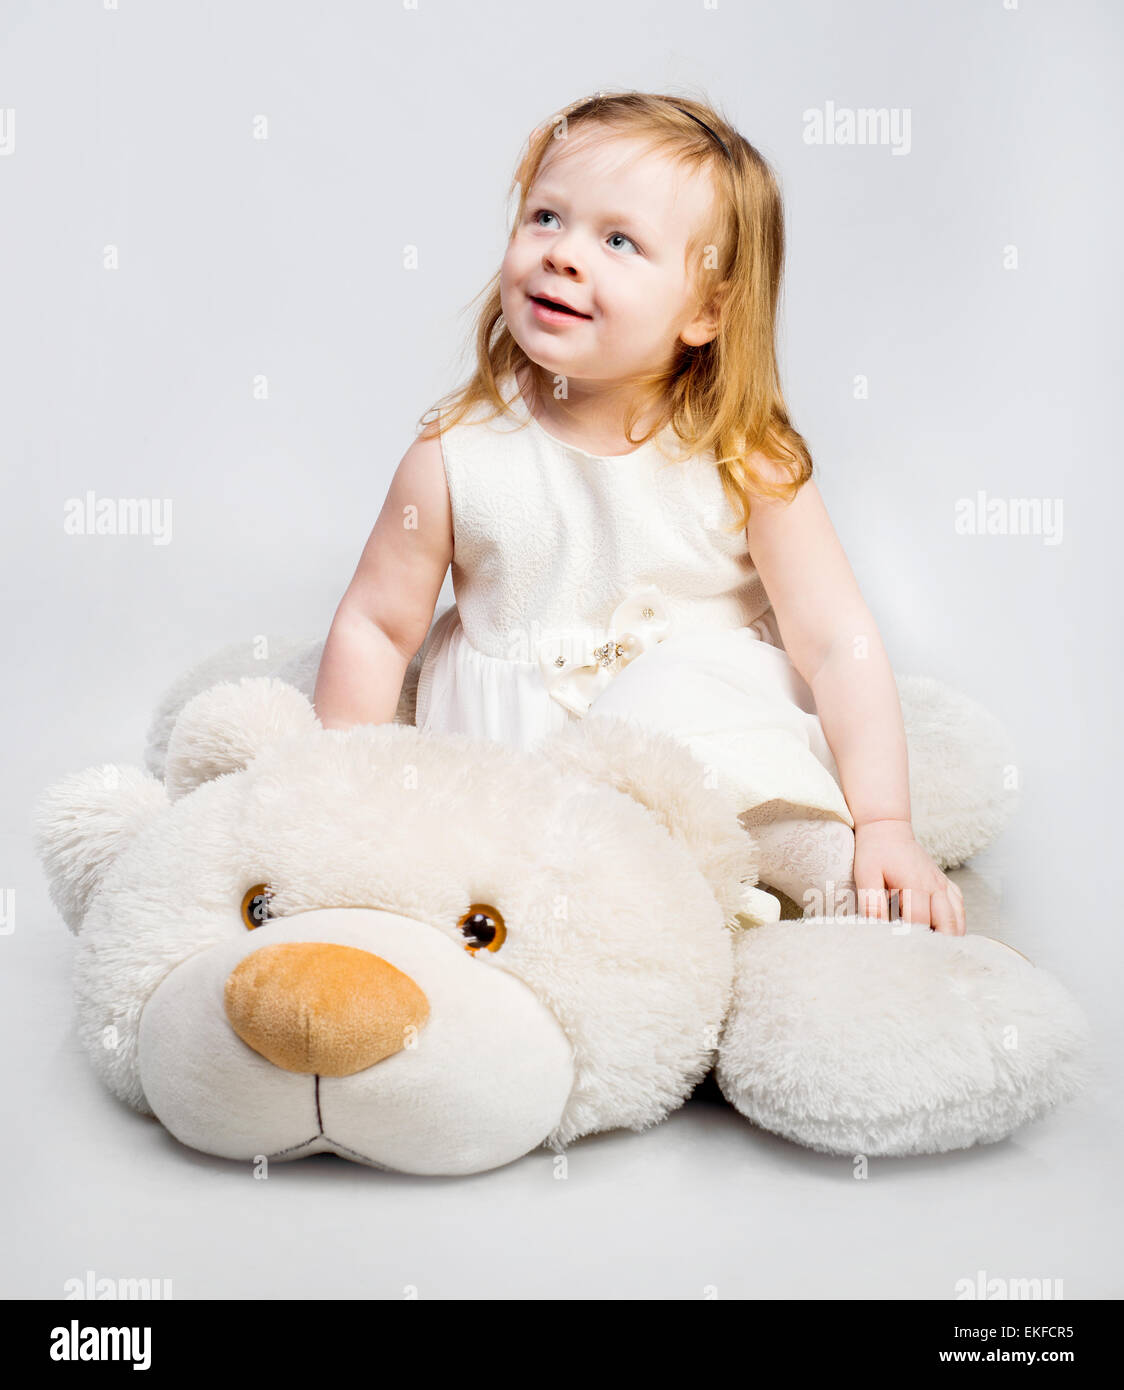 Little girl with toy bear Stock Photo